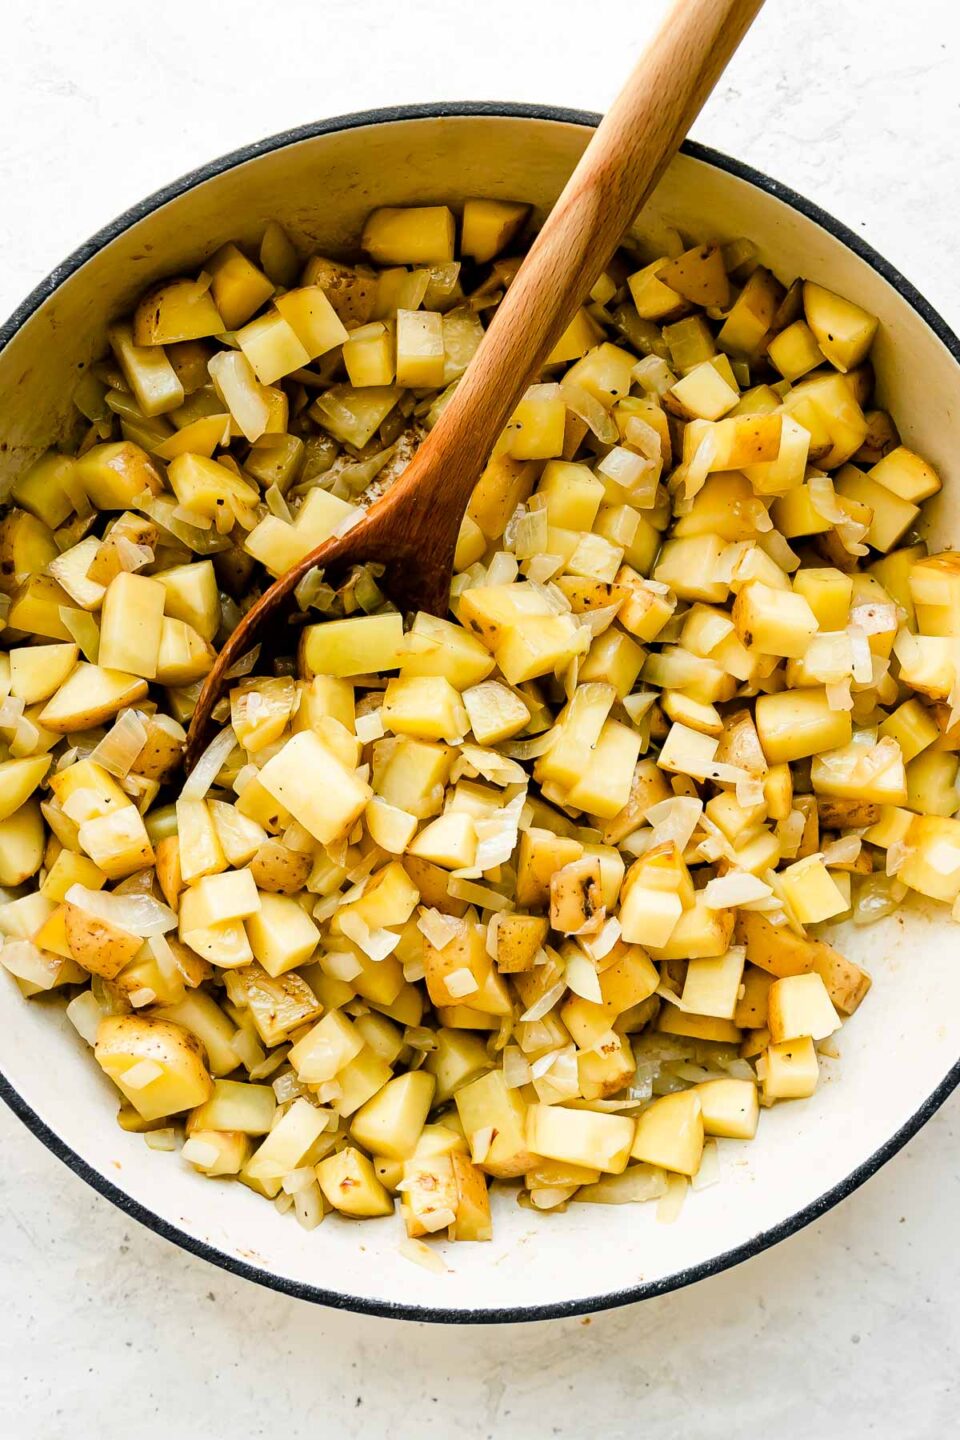 Diced Yukon gold potatoes and onion fill a large white double handled braising pan that sits atop a creamy white textured surface. A wooden spatula rests inside of the pan for stirring.